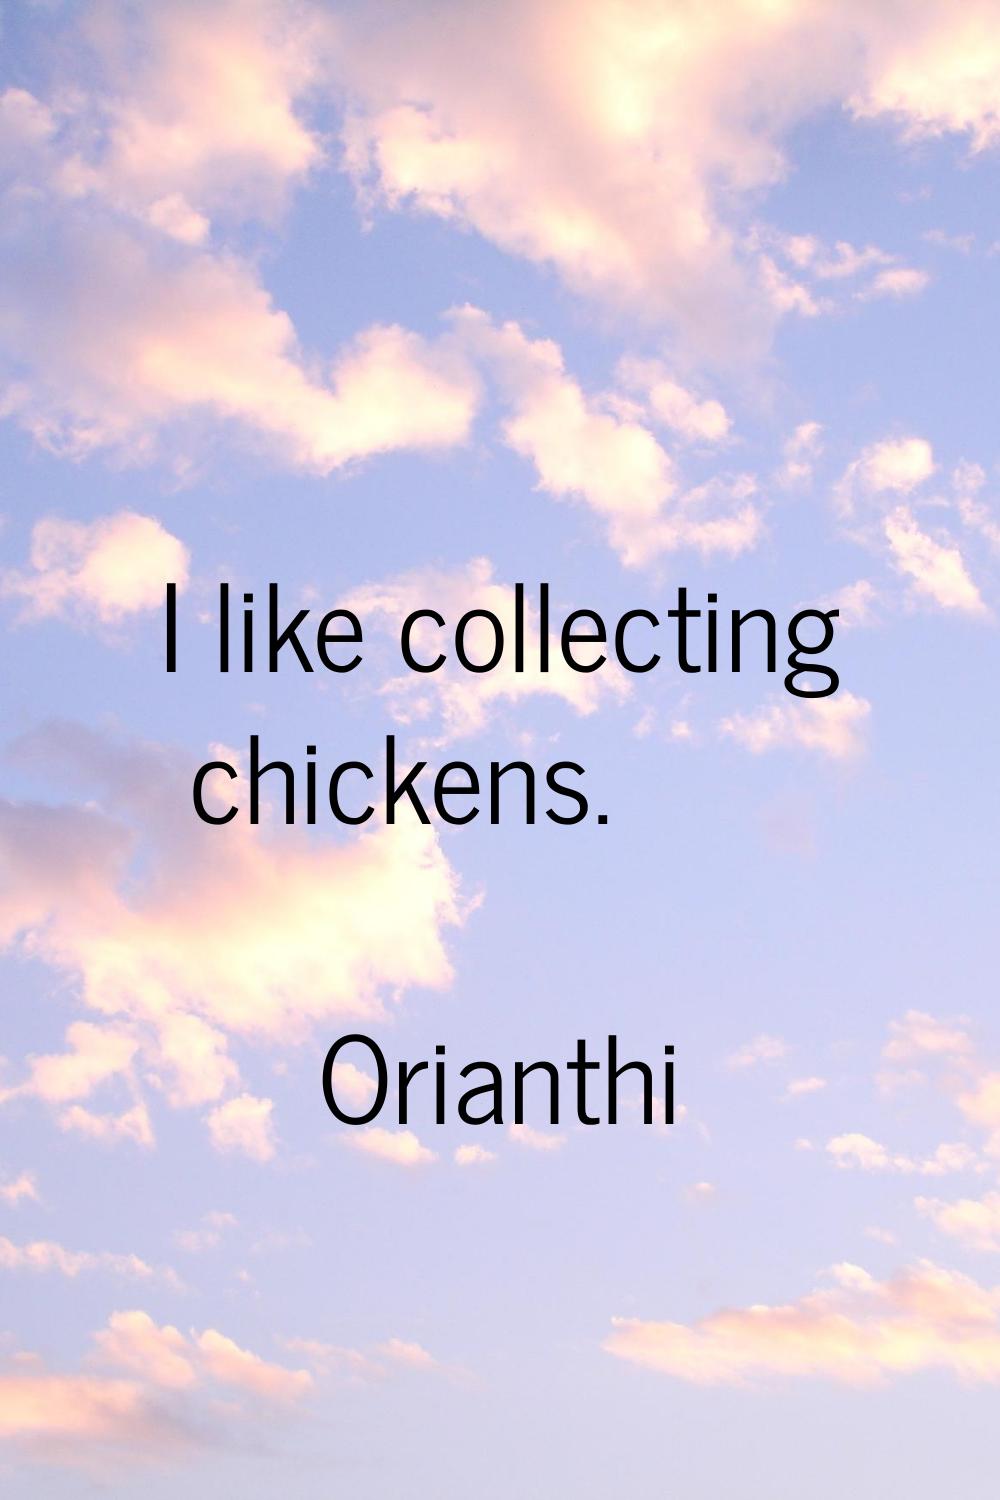 I like collecting chickens.